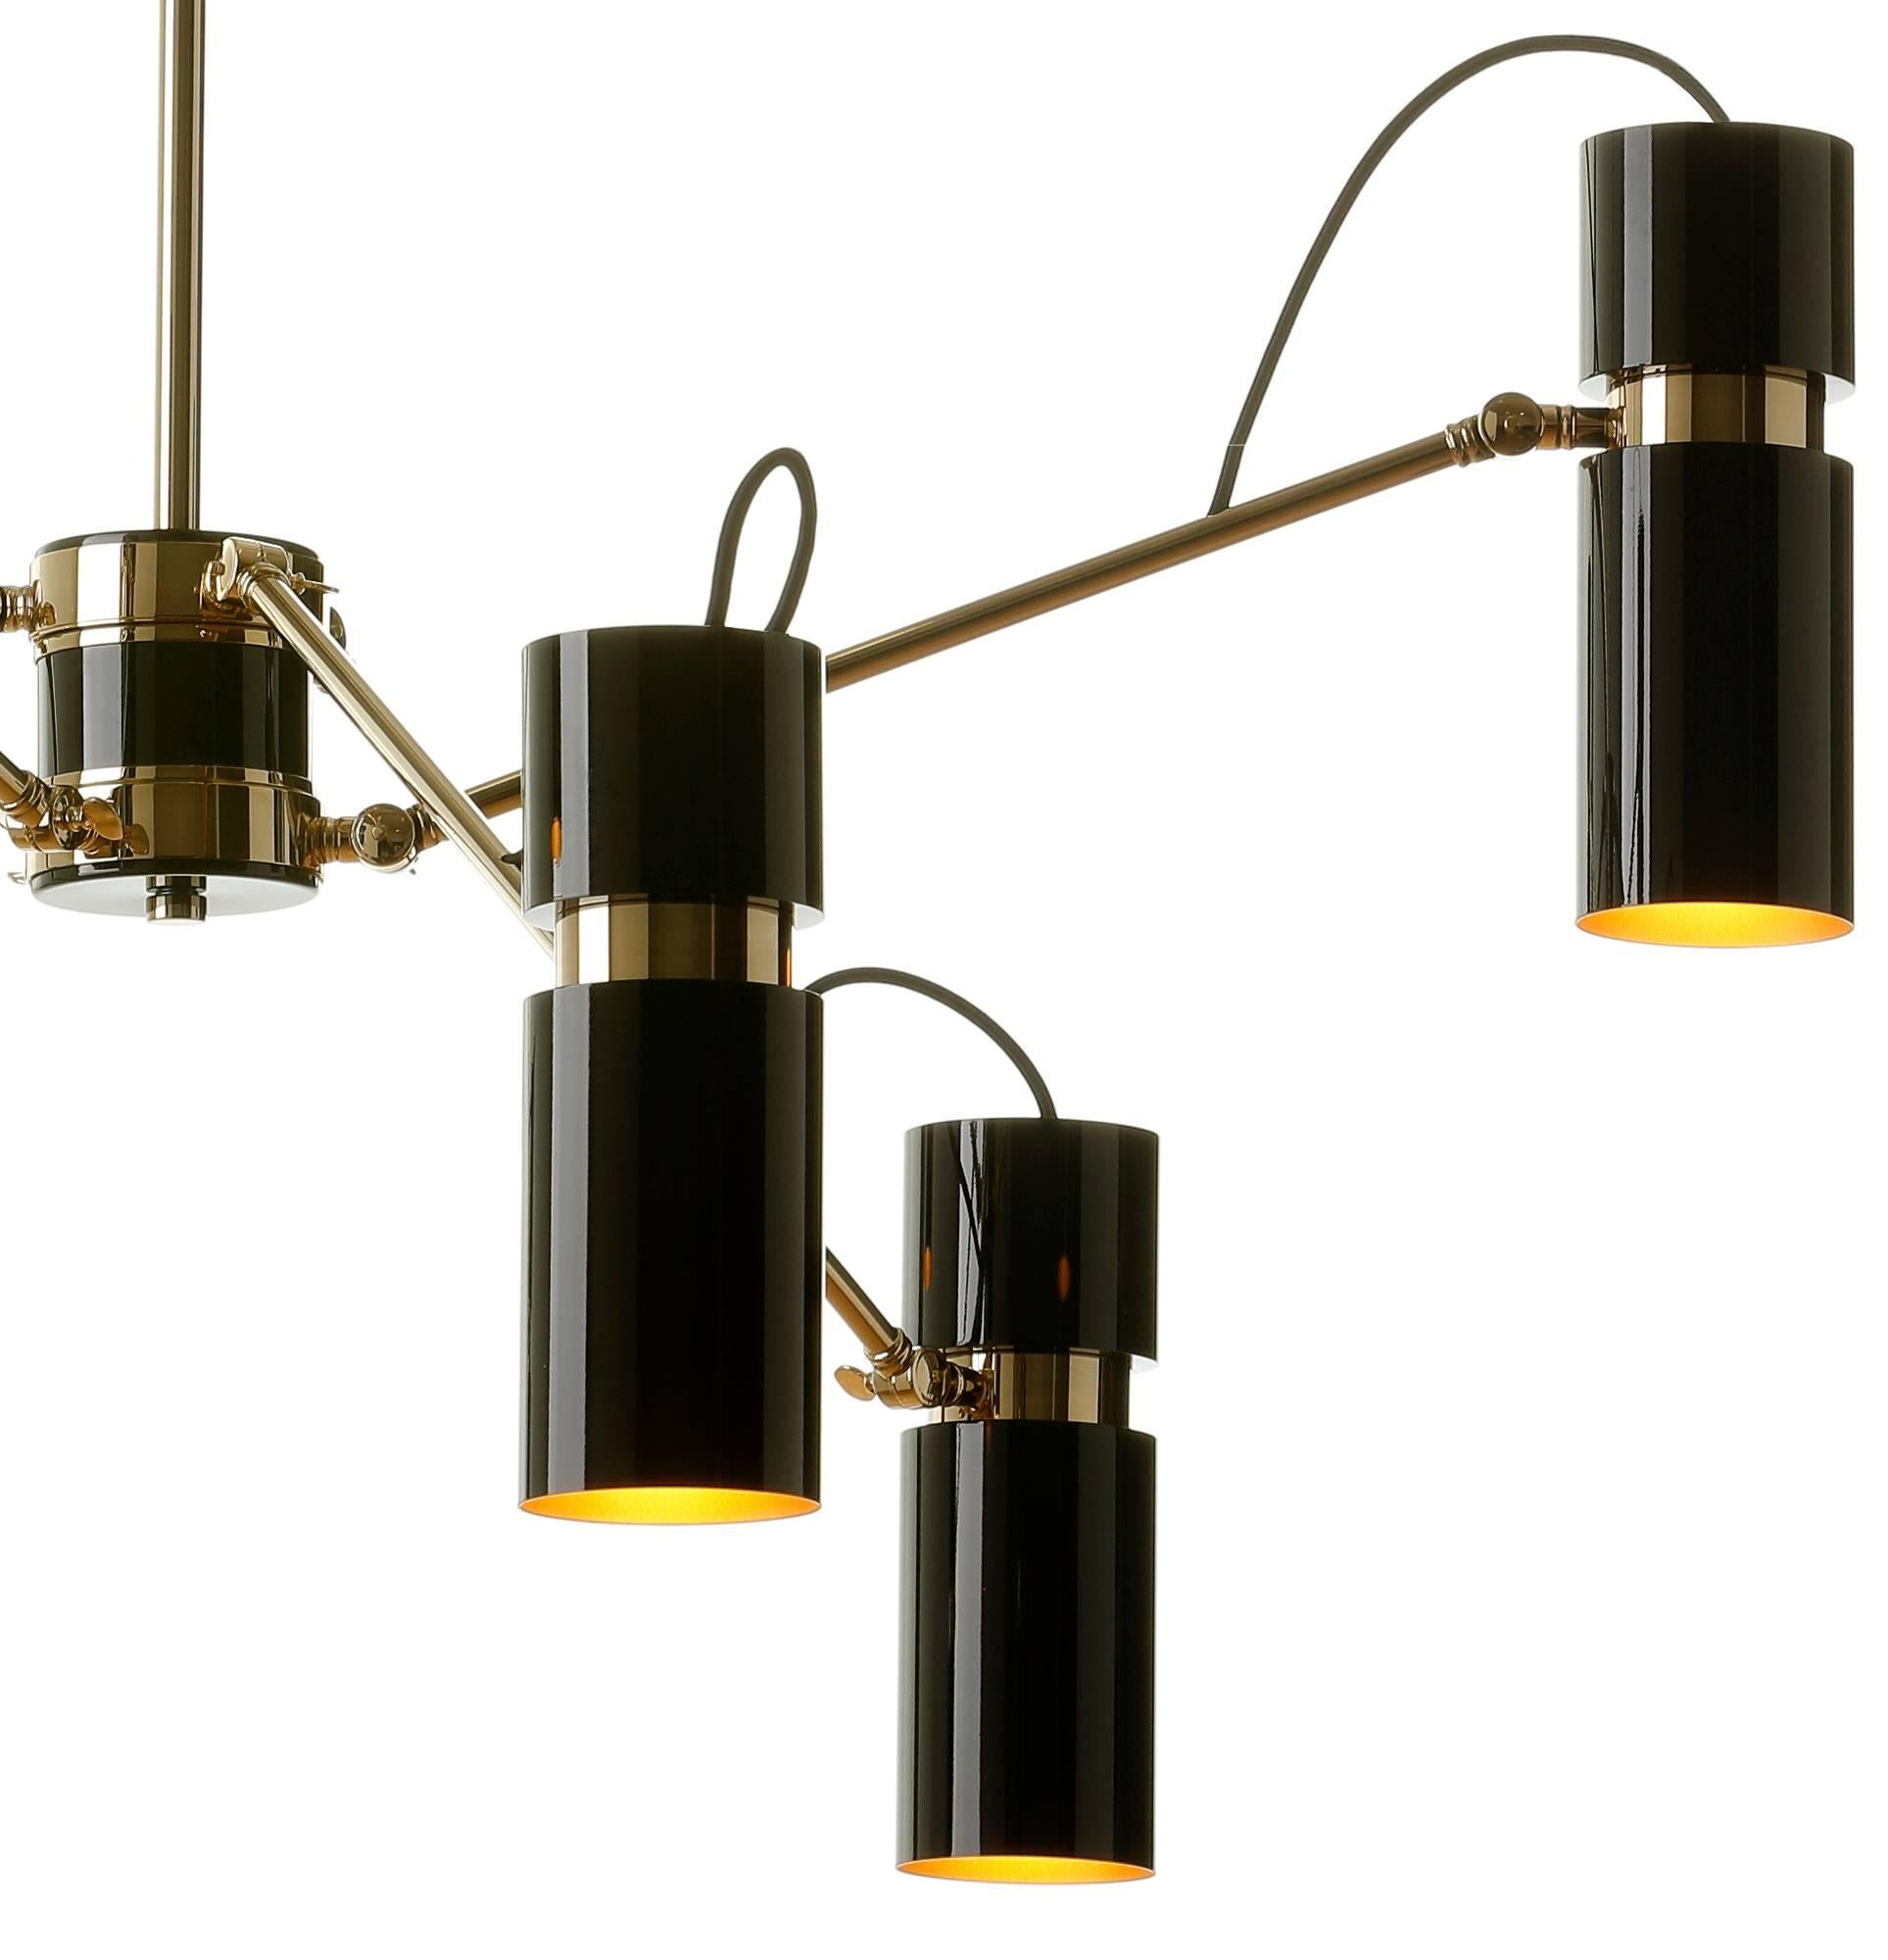 Mid-Century Modern six-arm chandelier.

Measures (cm): 100x100
lamps: Six lamp e14 max. 40w
class: Class I
material: Brass
finish: Gold/lacquer black
weight: 20 kg
packaging (cm): 60 x 60 x 120.